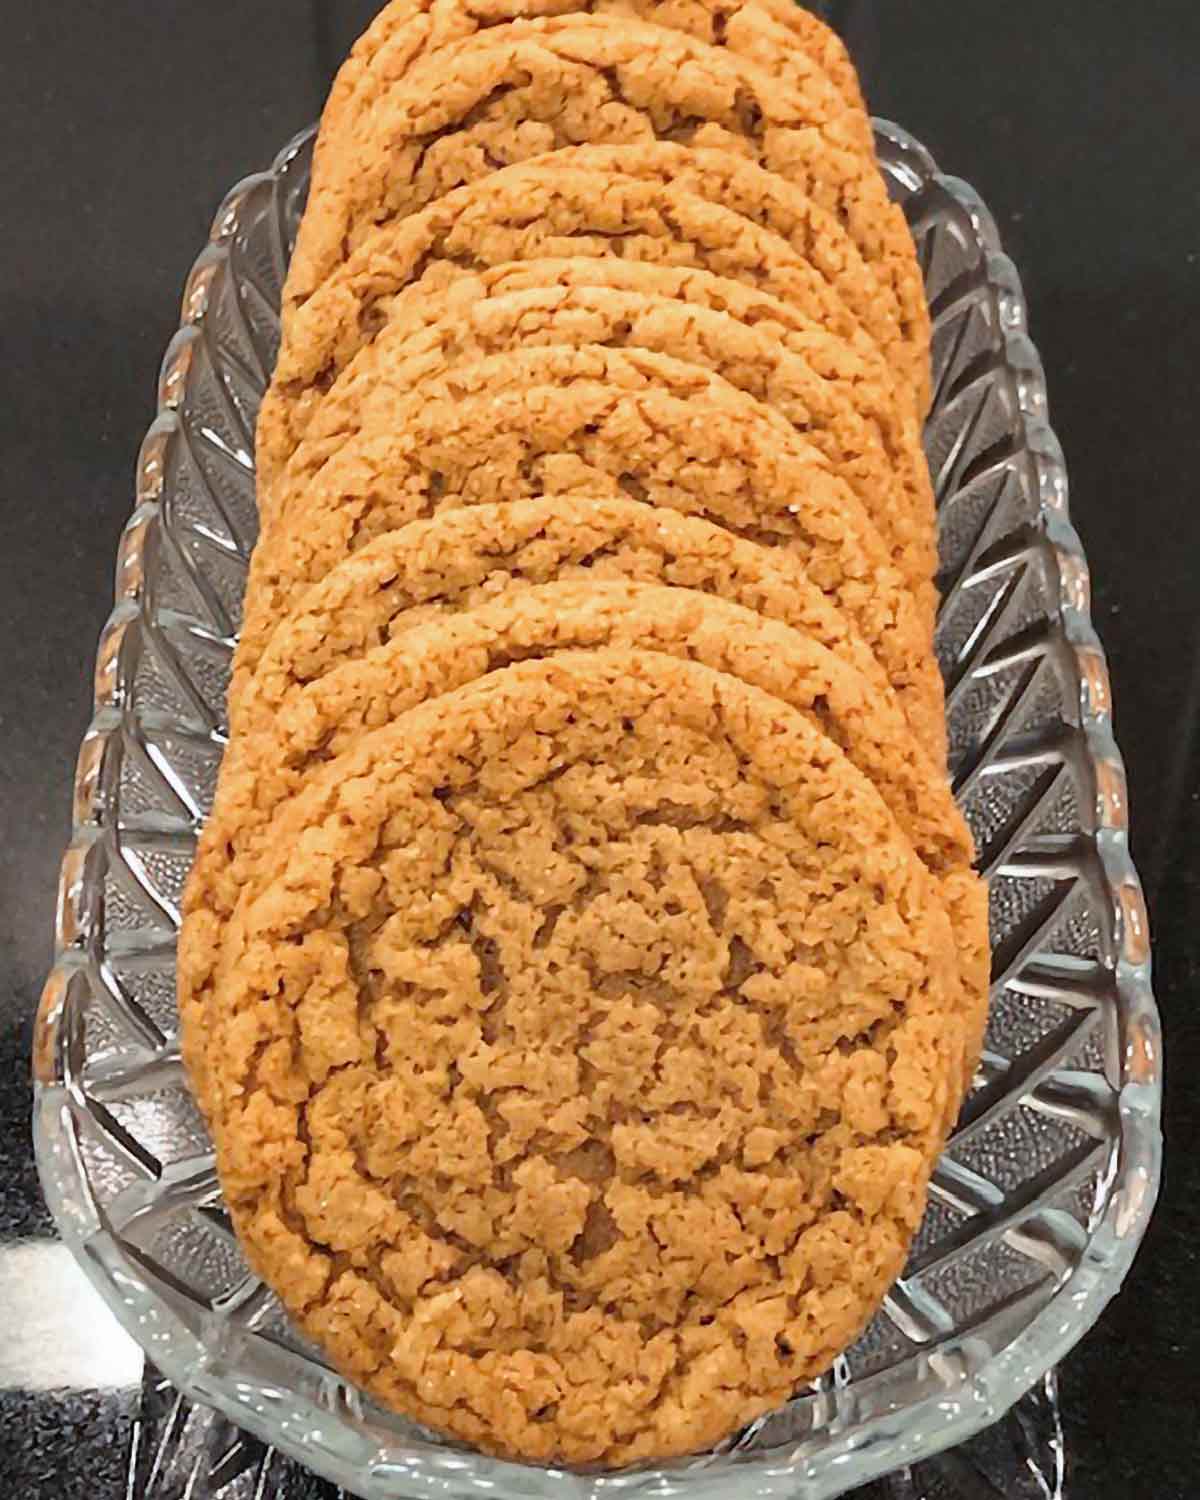 A stack of chewy molasses cookies arranged in a glass dish.